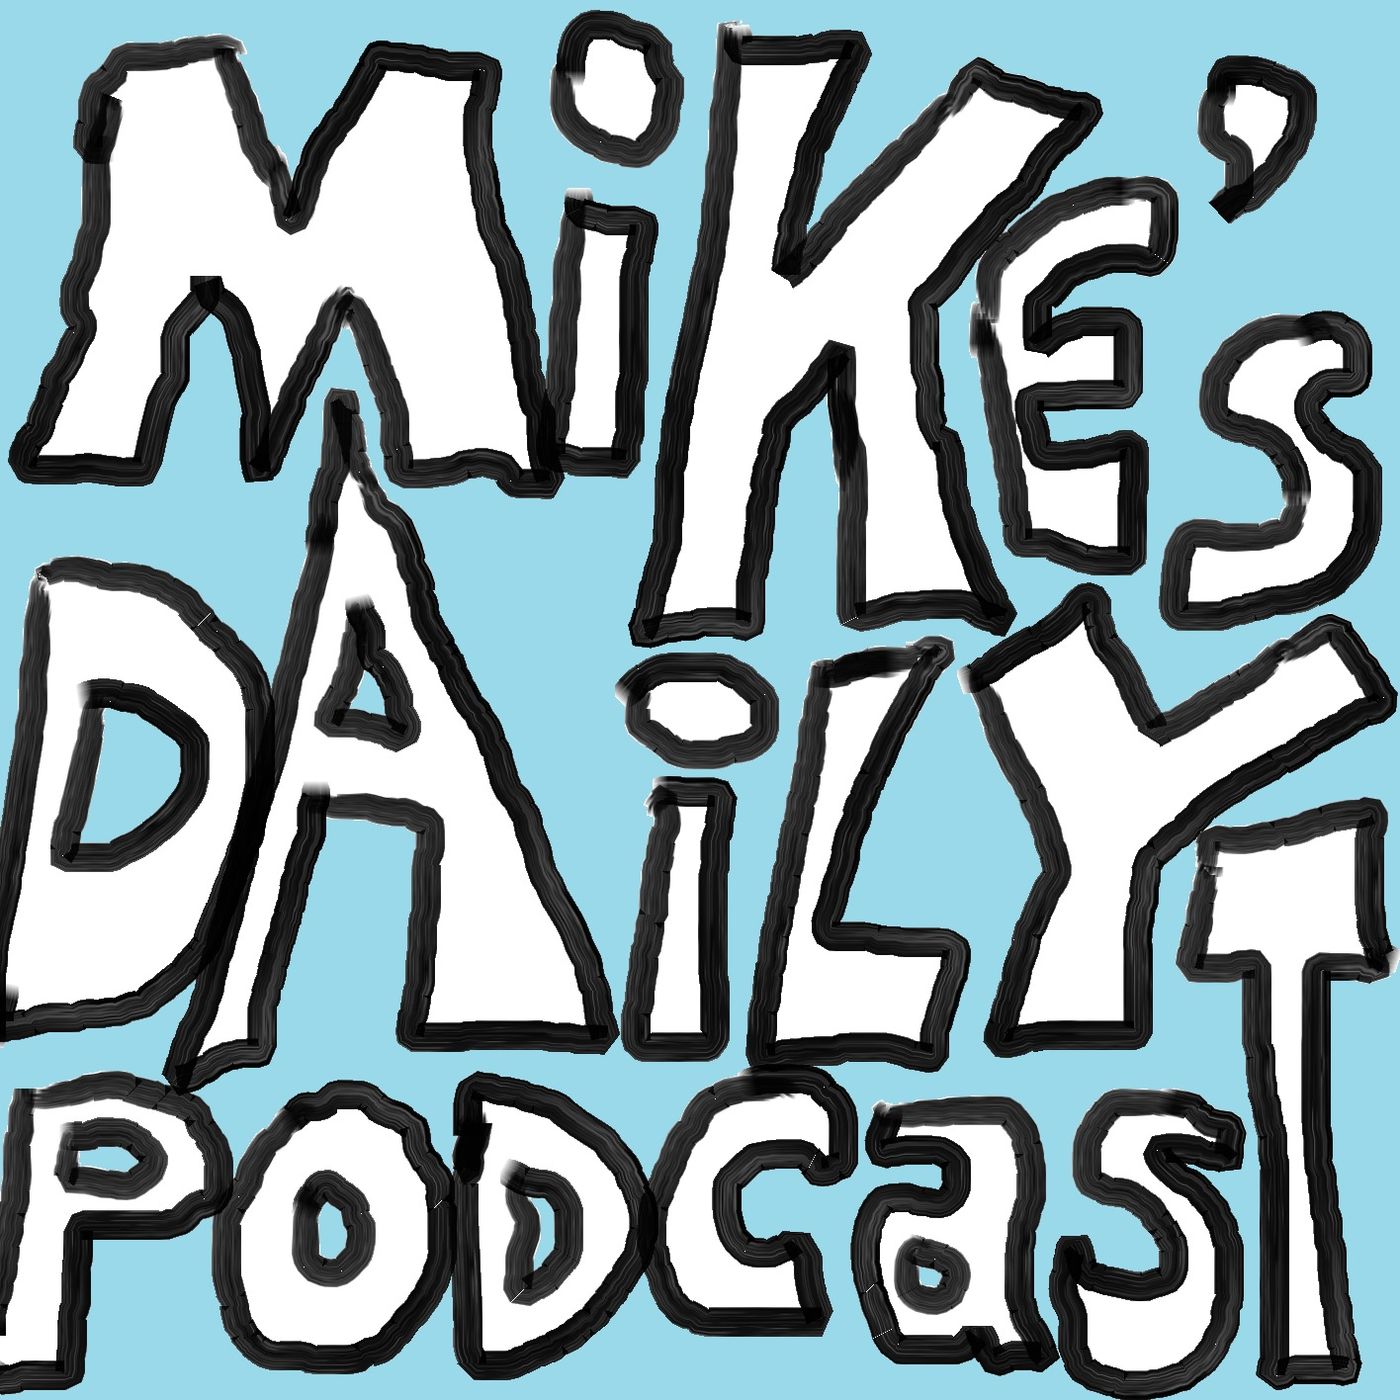 Mike’s Daily Podcast